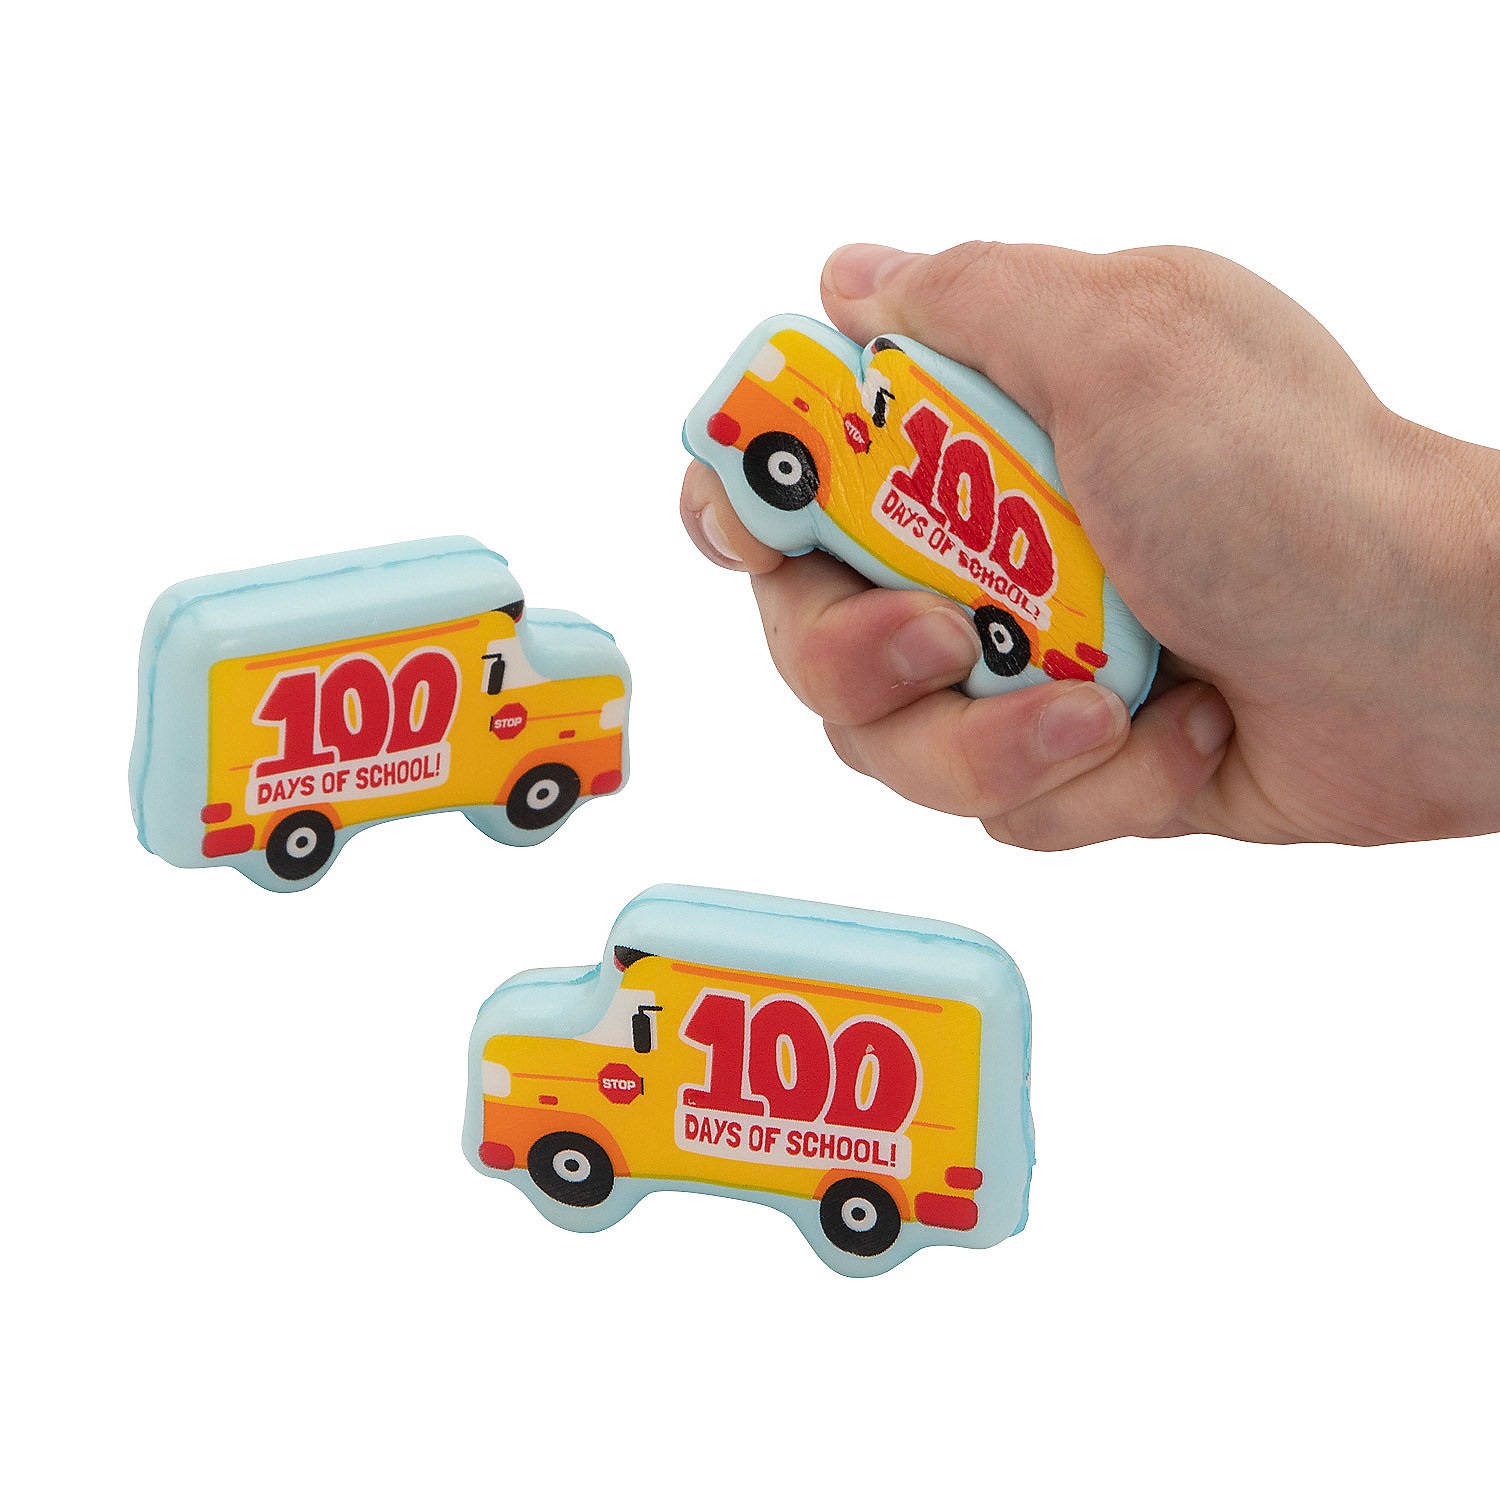 100th-day-of-school-stress-toys-12-pc-_14204436